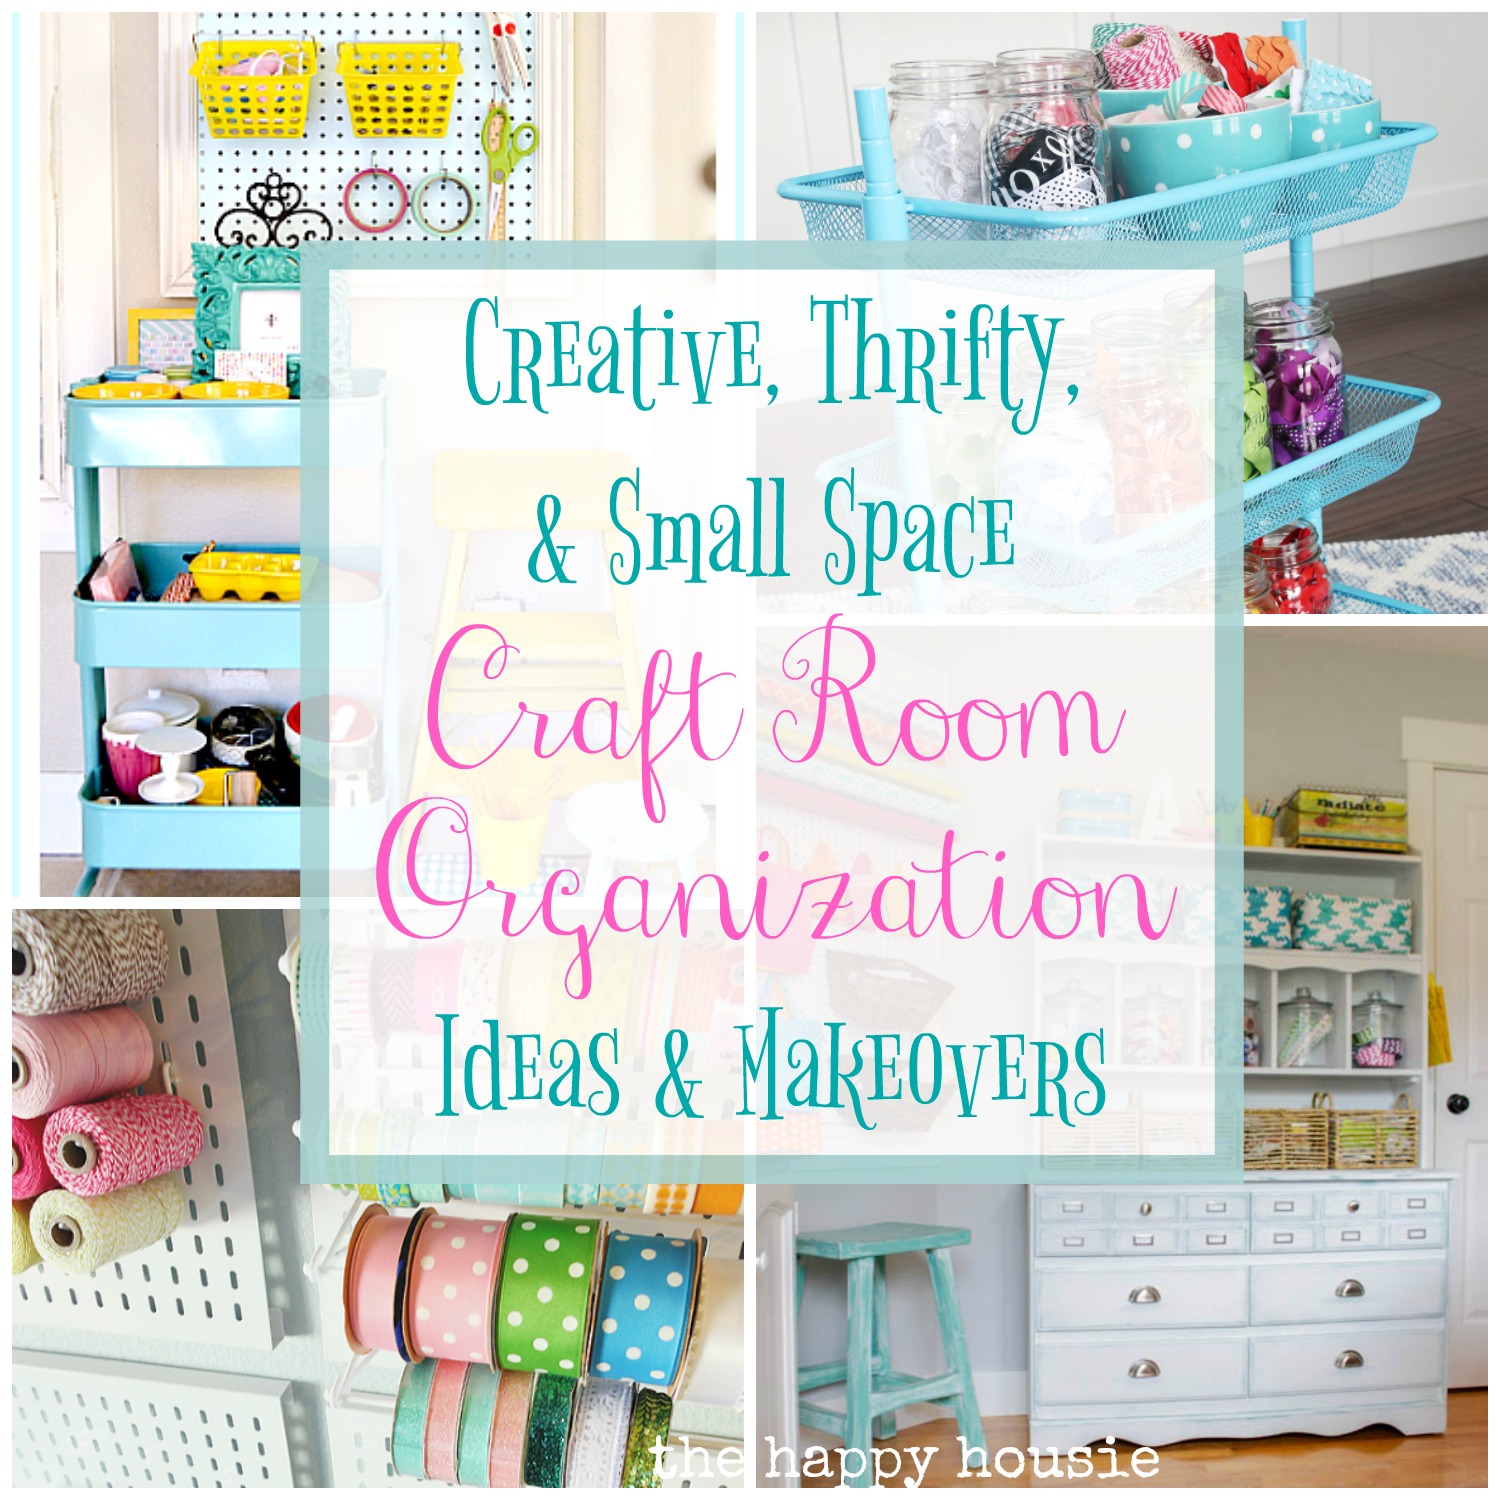 Creative, Thrifty, & Small Space Craft Room Organization Ideas | The Happy Housie